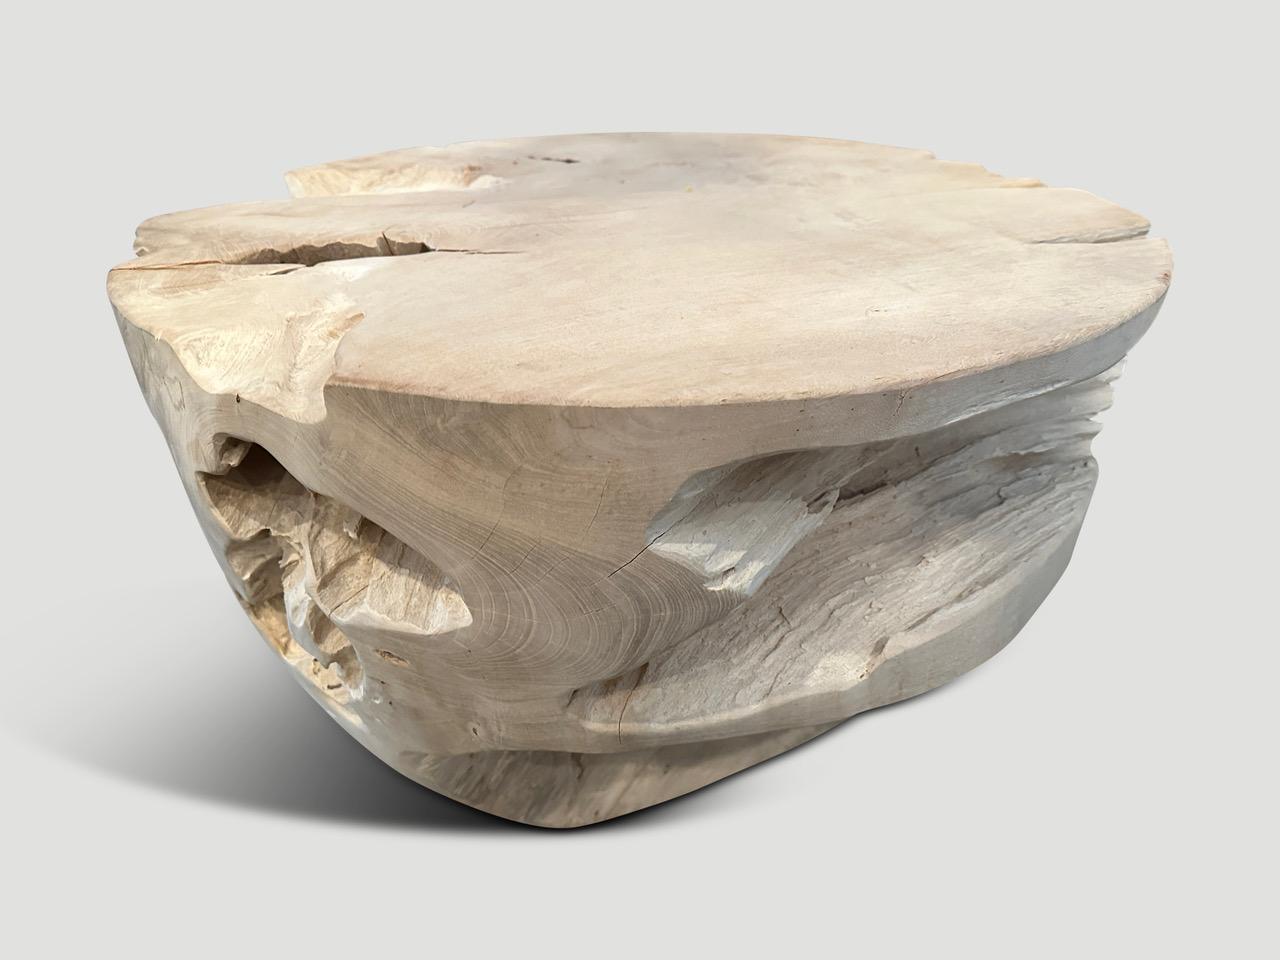 Reclaimed teak root coffee table hand carved into a drum shape whilst respecting the natural organic wood. We added a light white wash revealing the beautiful wood grain. Both usable and sculptural. 

The St. Barts Collection features an exciting